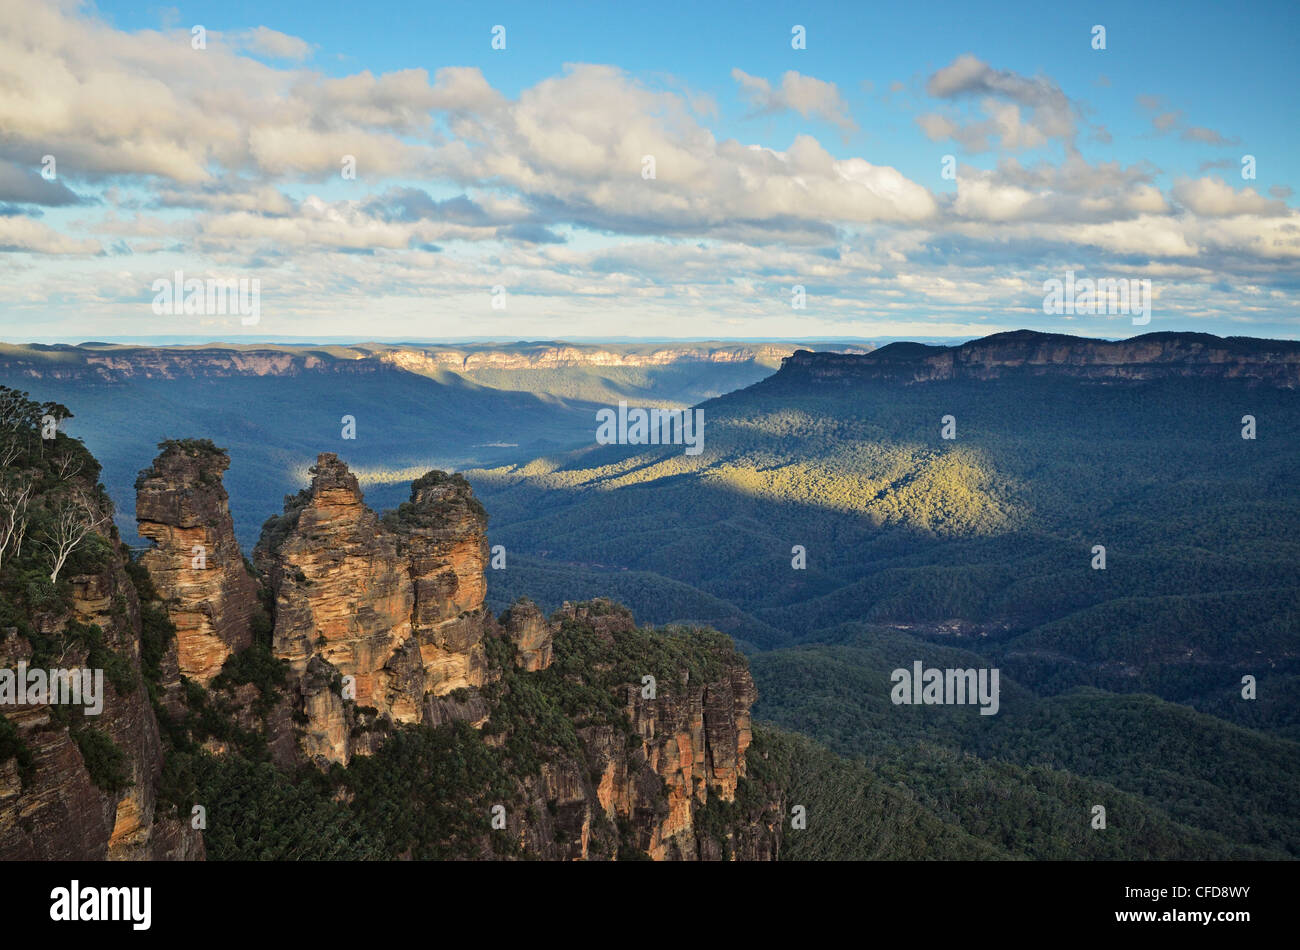 The,Sisters and Jamison Valley, Blue Mountains, Blue Mountains National Park, New South Wales, Australia Stock Photo